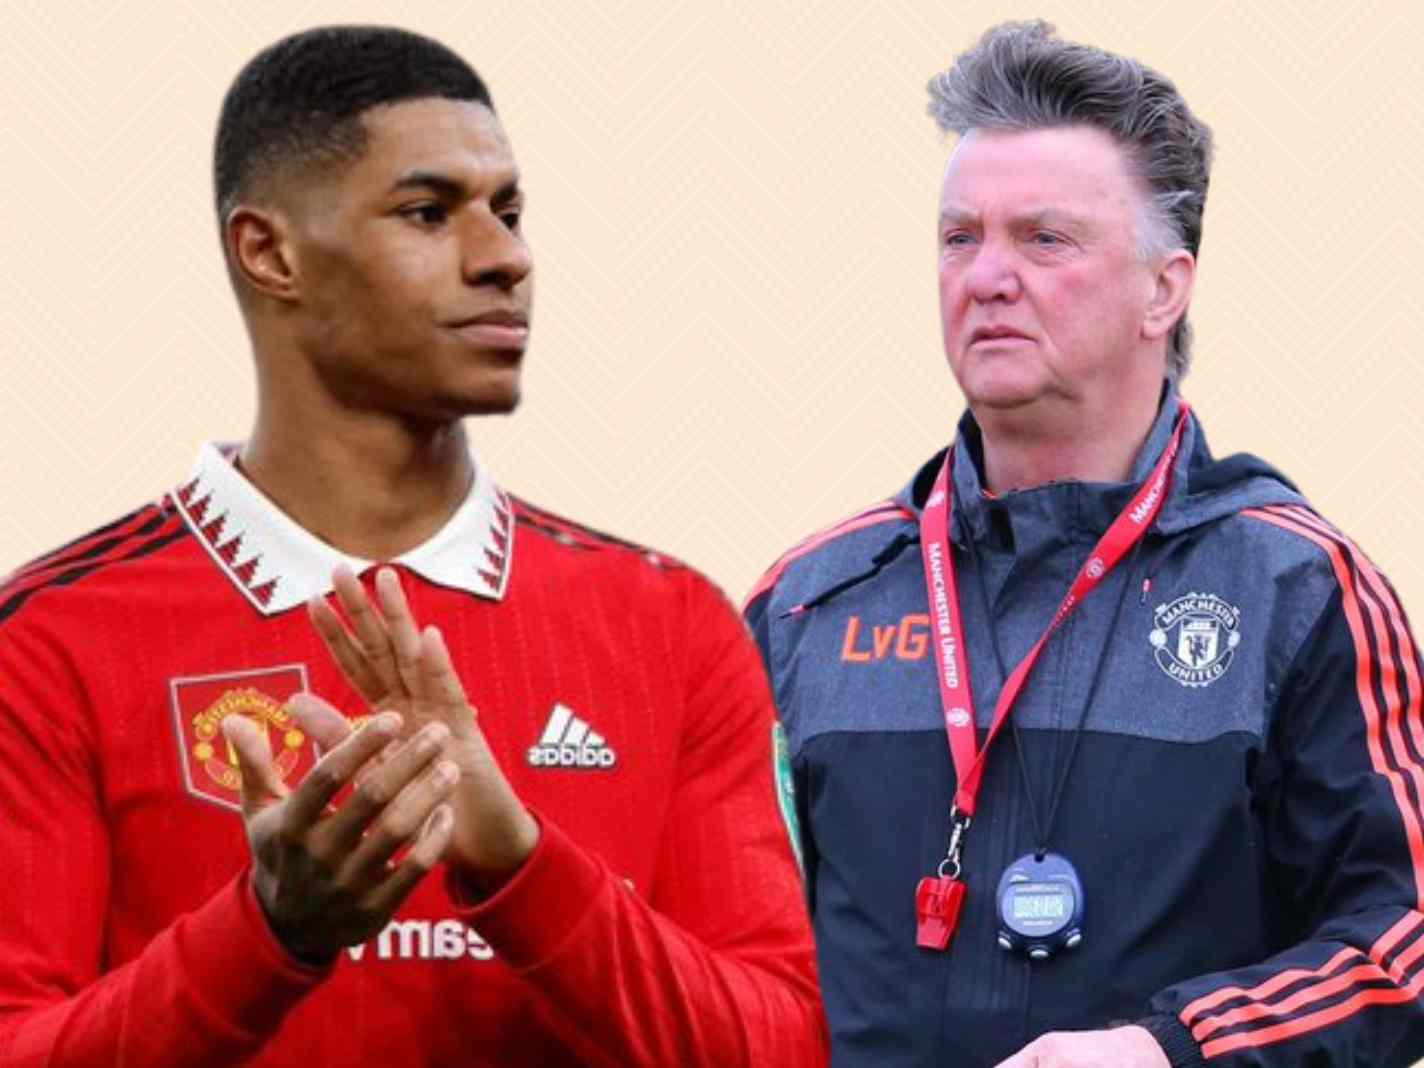 Louis van Gaal forced Marcus Rashford to attend college, here’s how it played out